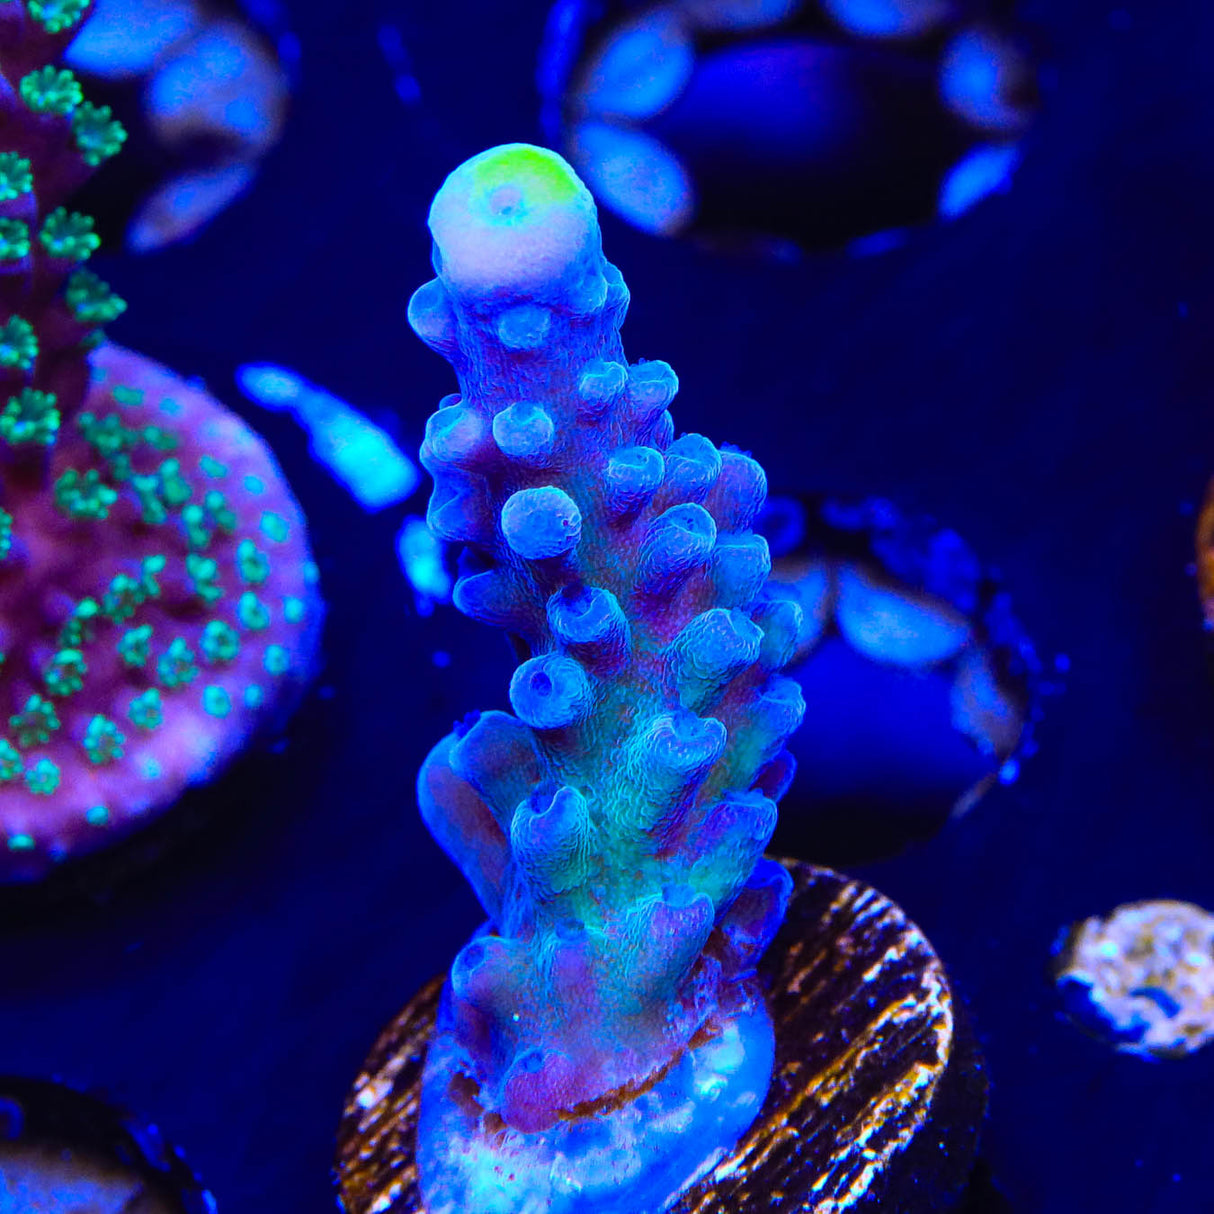 WWC Yellow Tip Acropora Coral